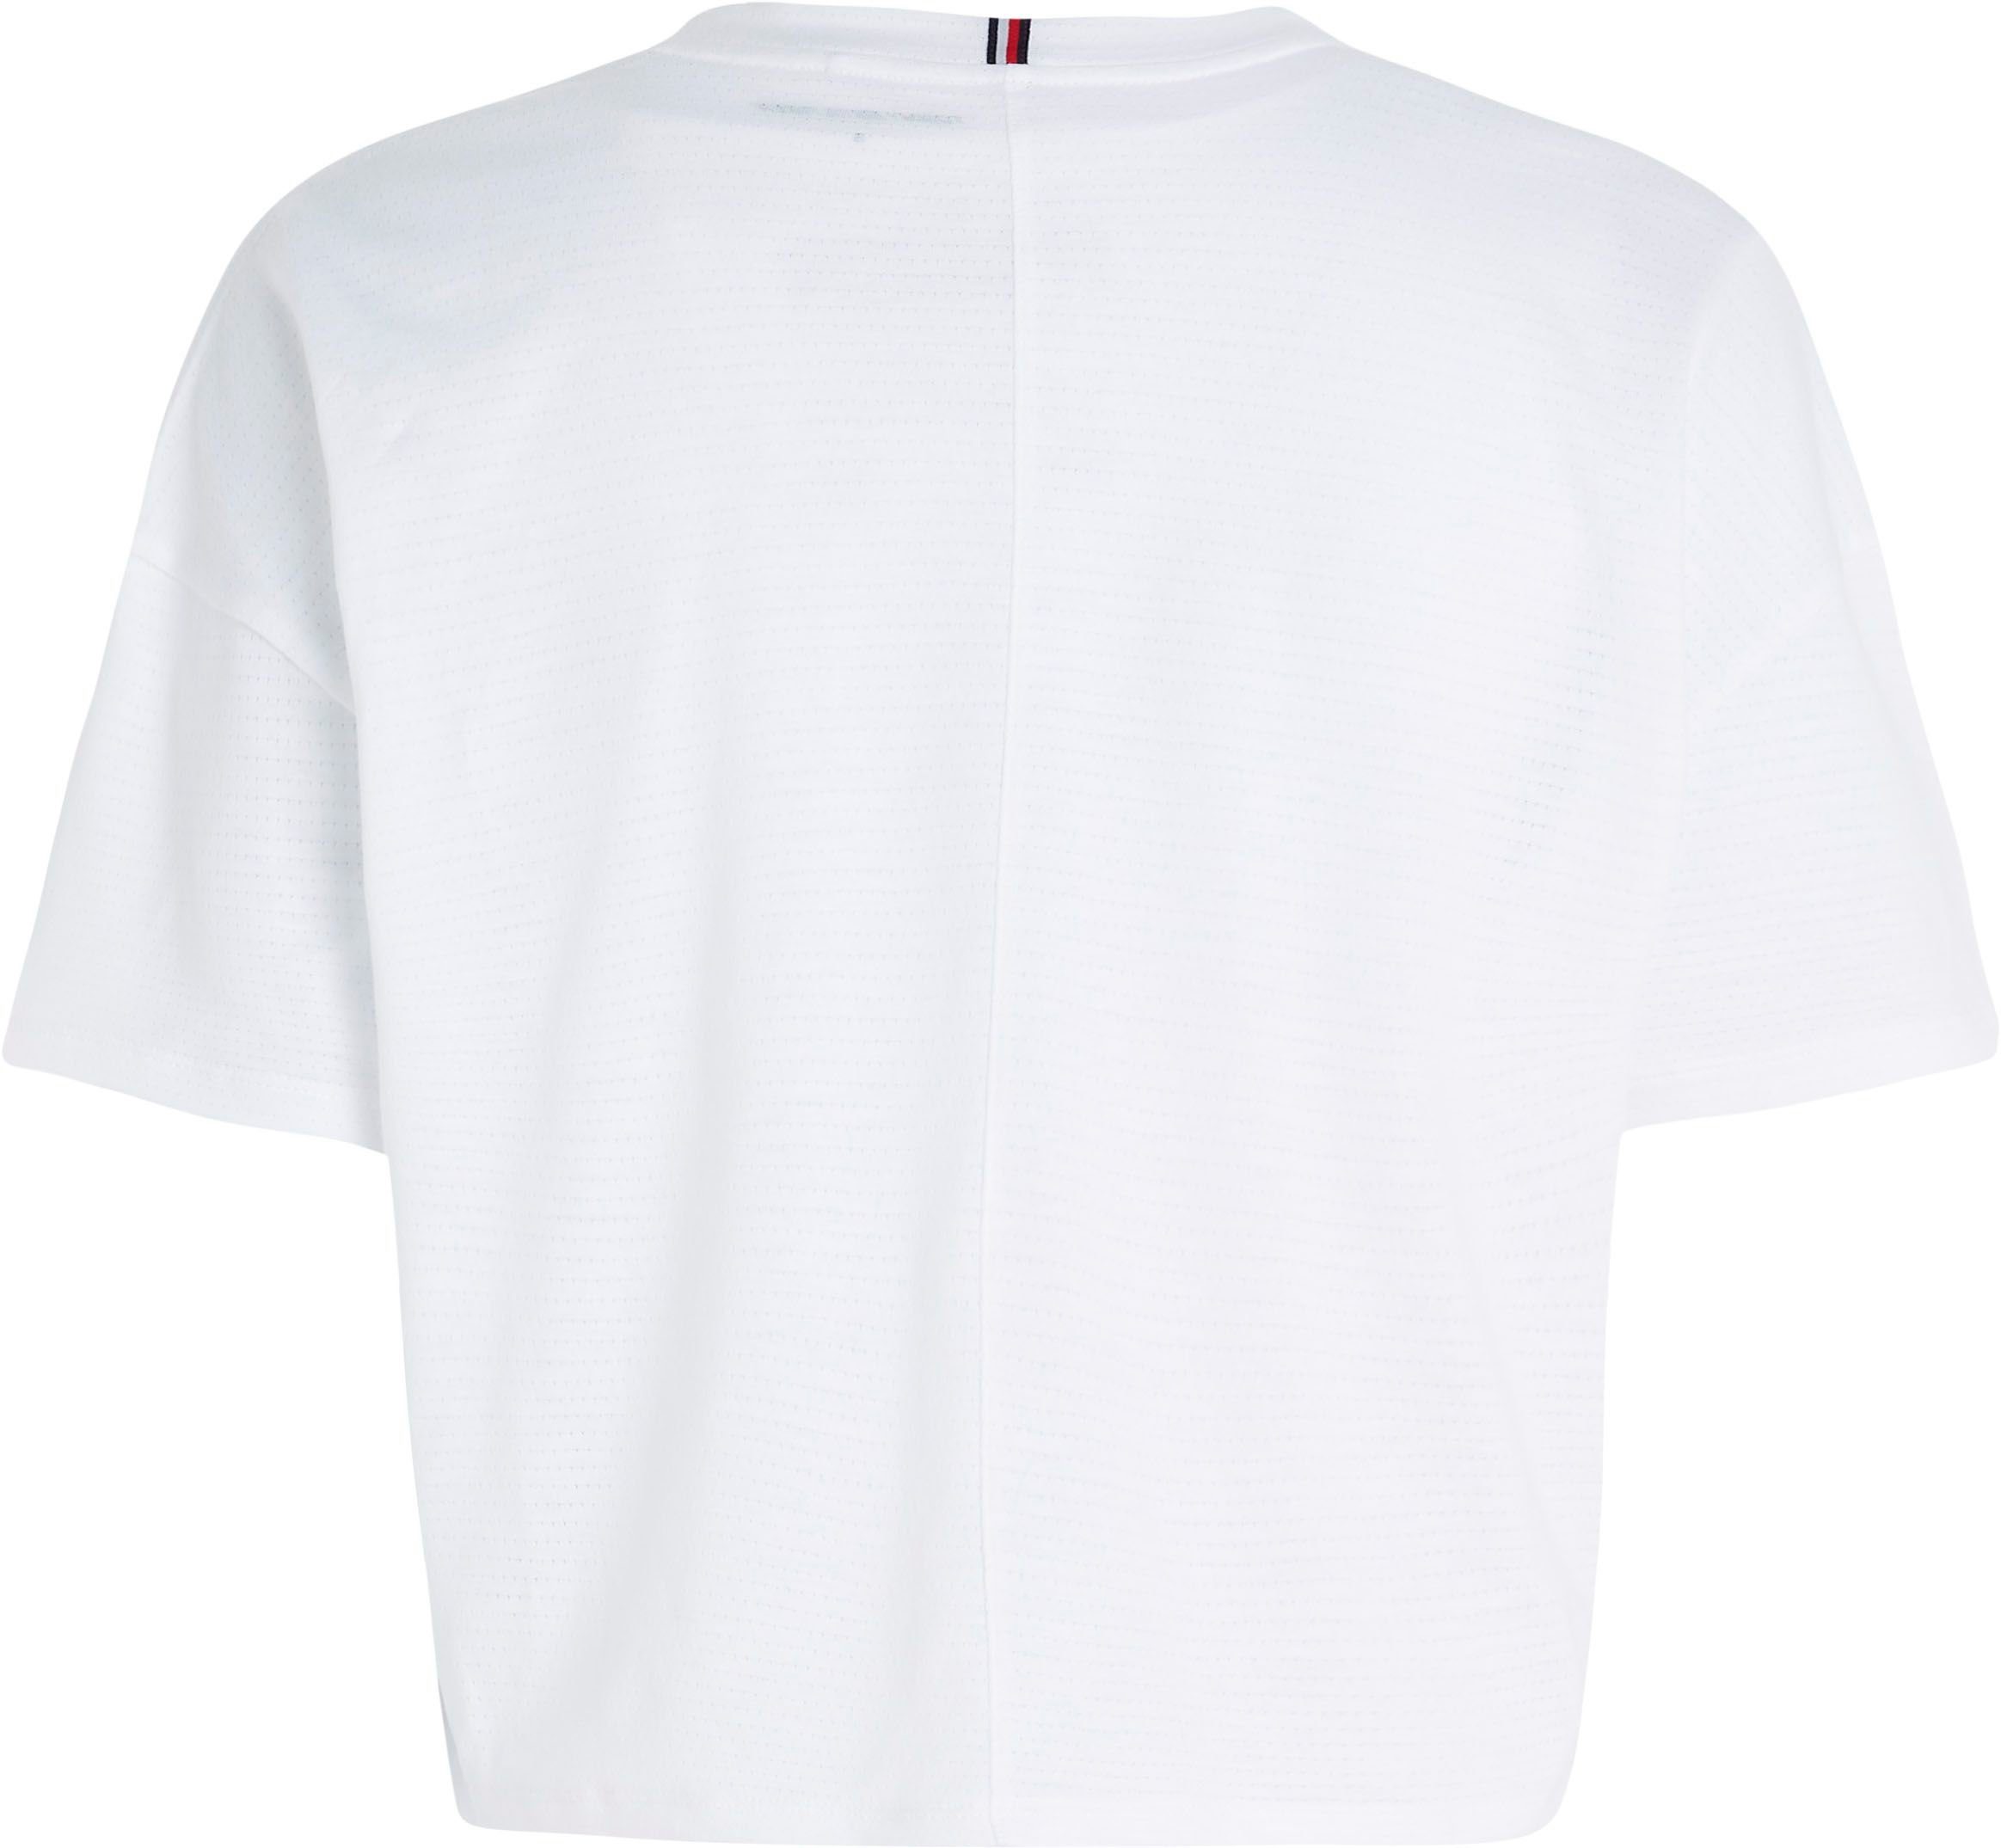 Th-Optic-White Hilfiger in T-Shirt modischer Form RELAXED CROPPED TEE cropped Sport ESSENTIALS Tommy